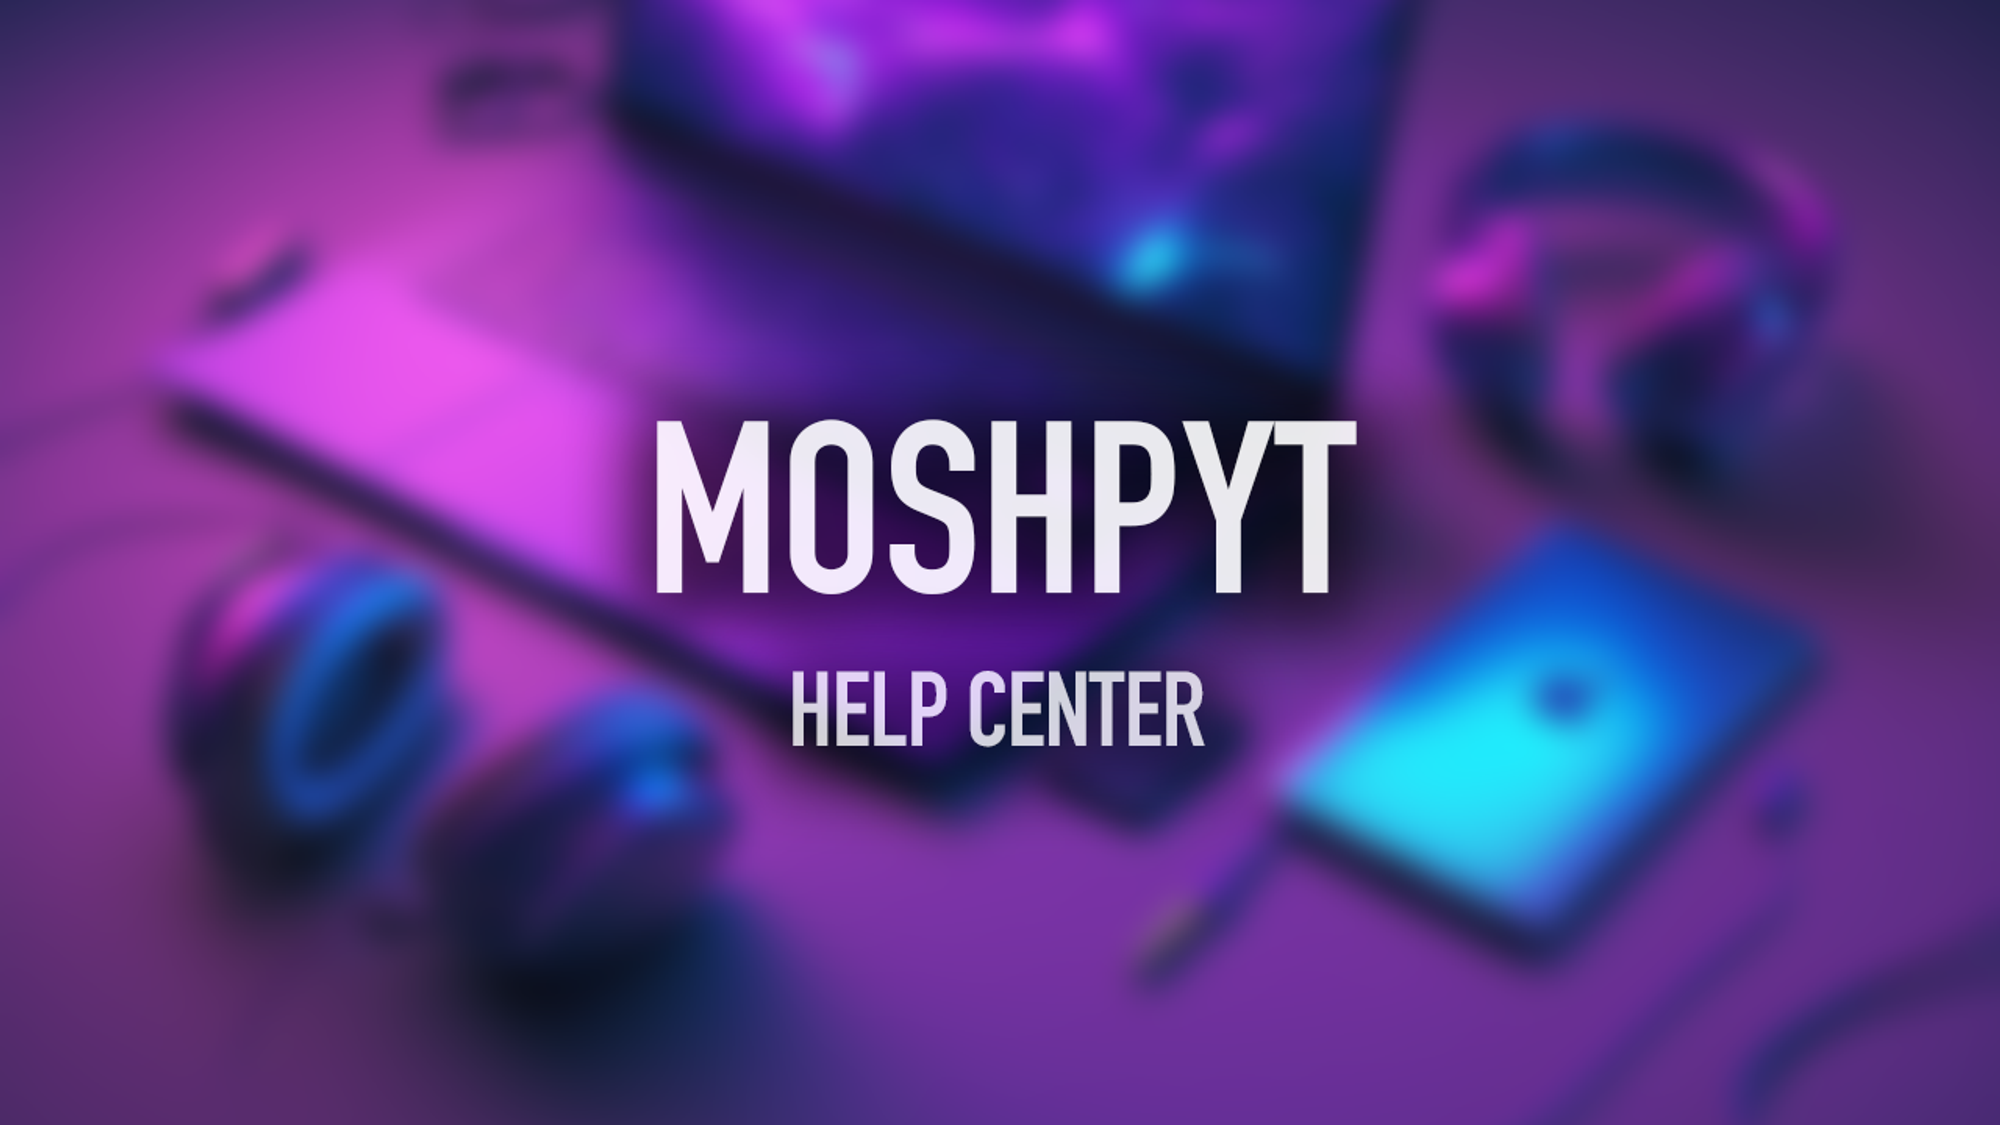 When do I Receive my AI Producer Tags on Moshpyt?